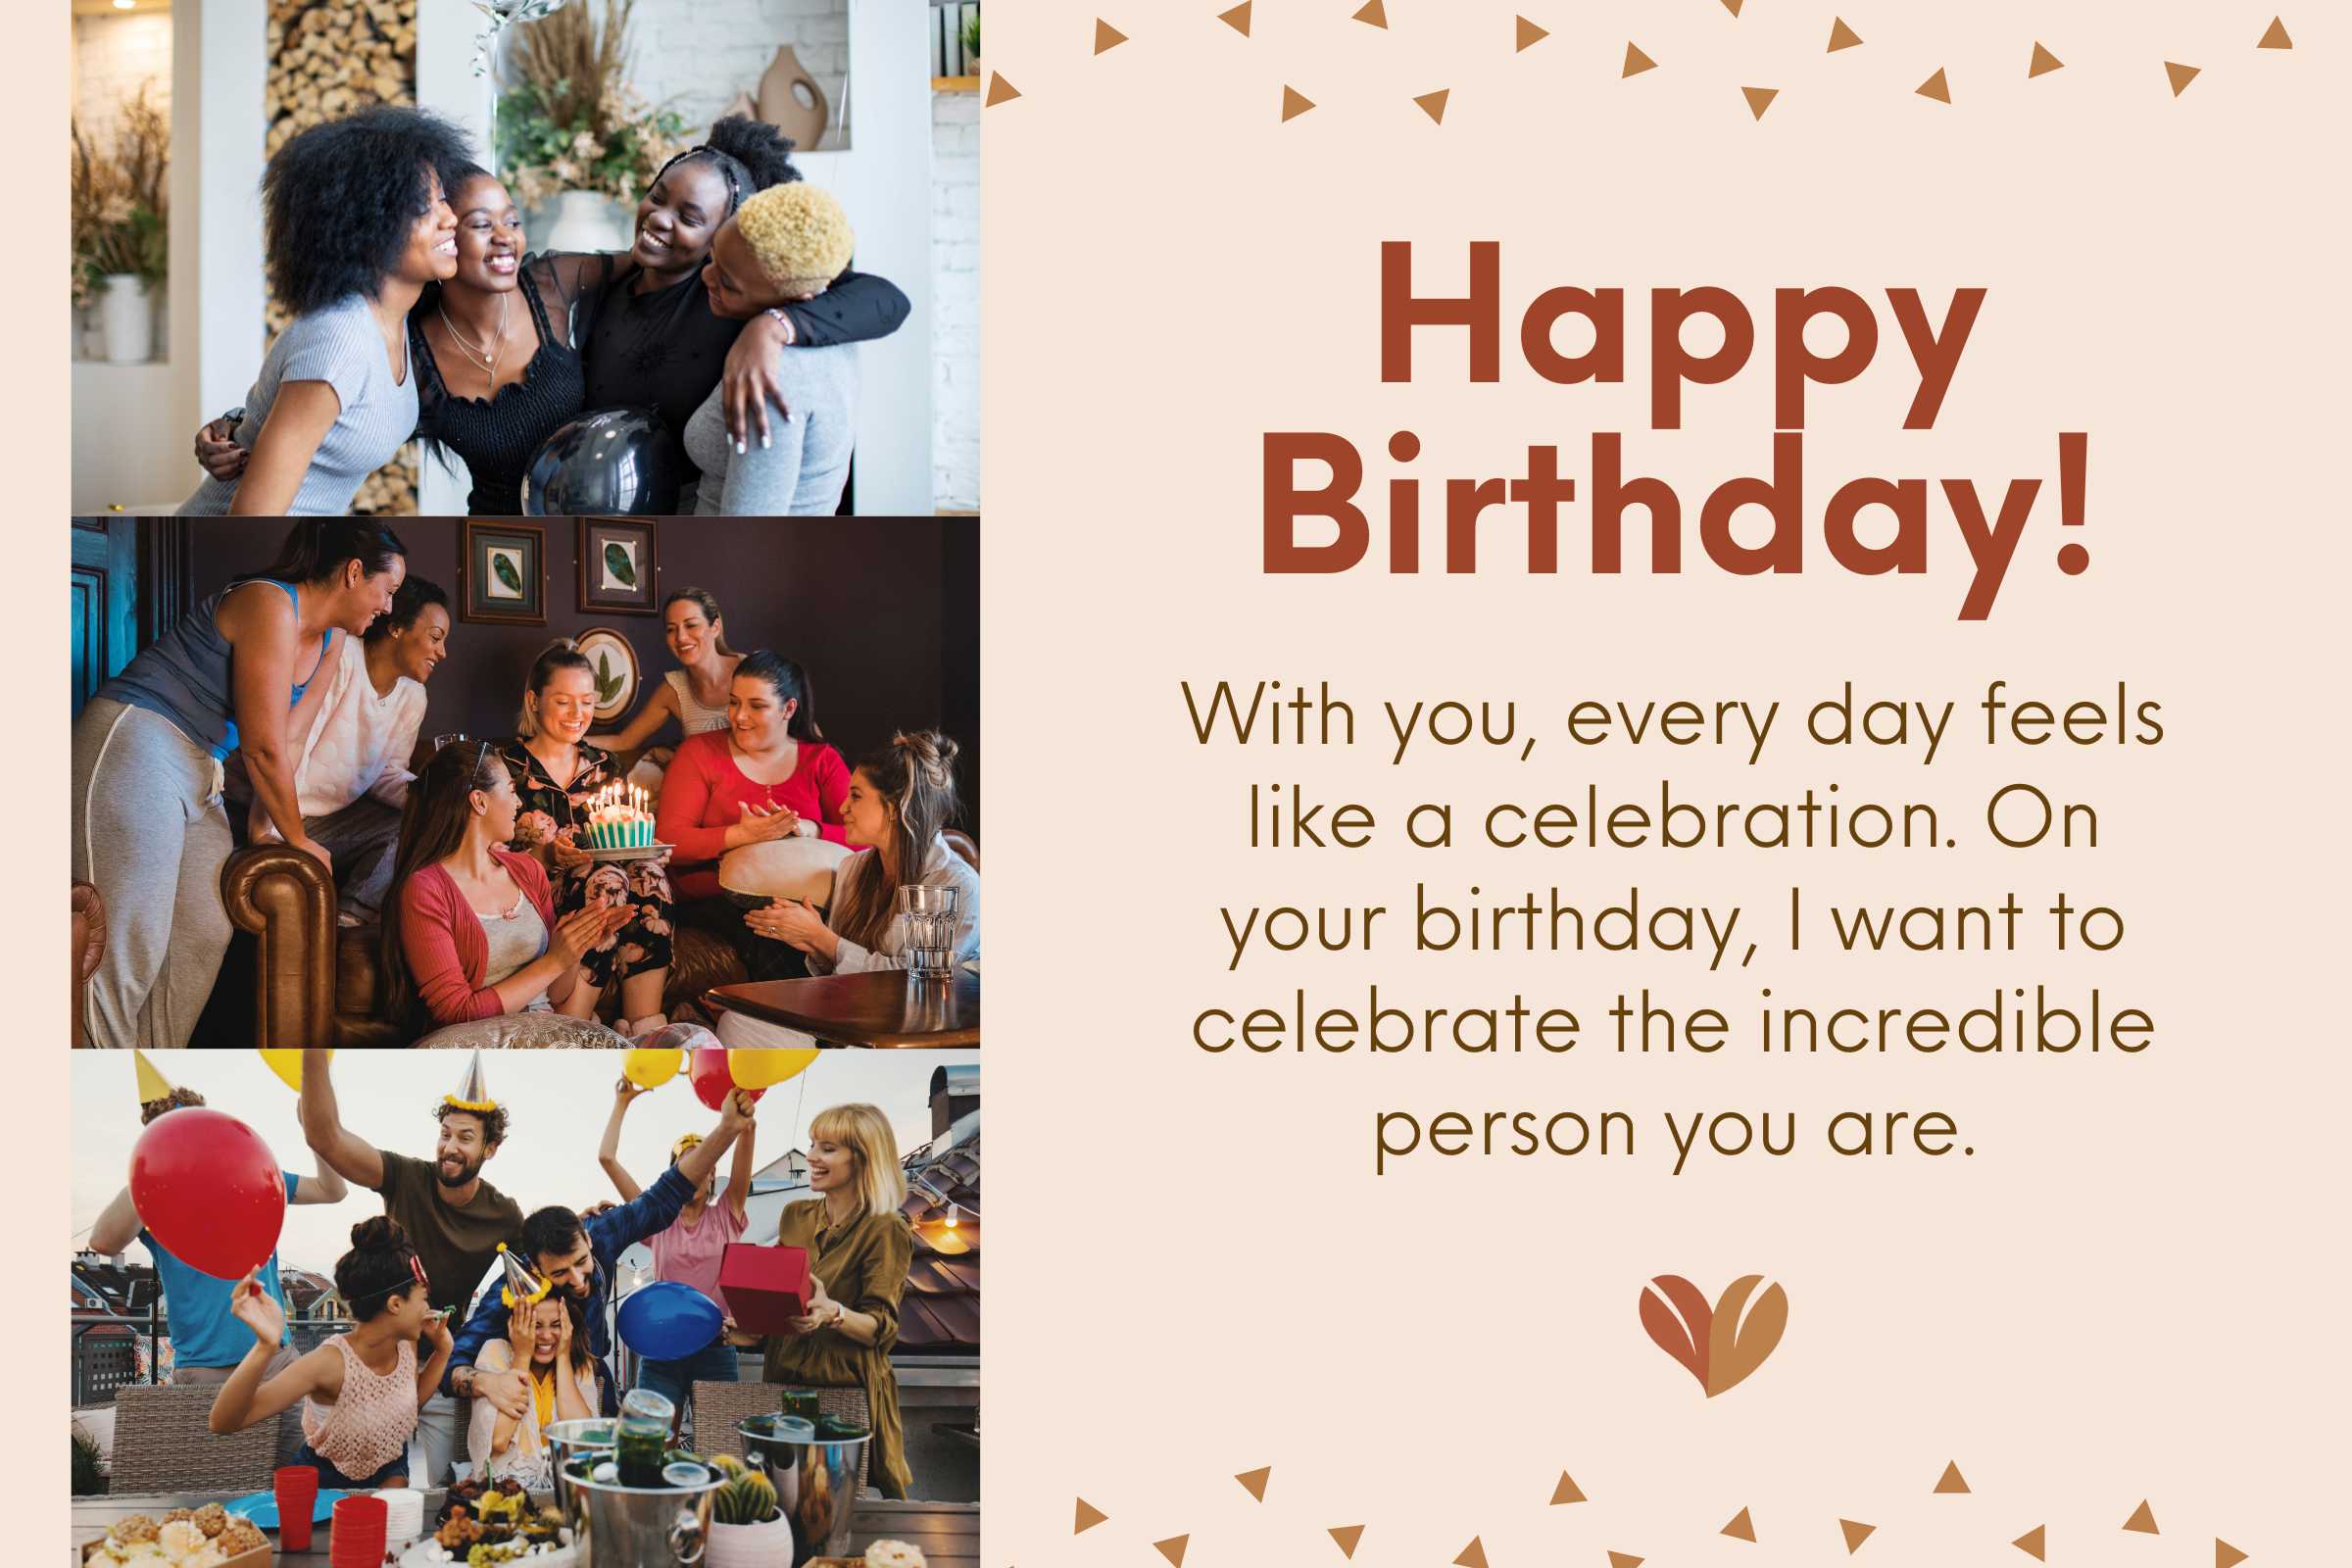 Celebrate the incredible person you are.